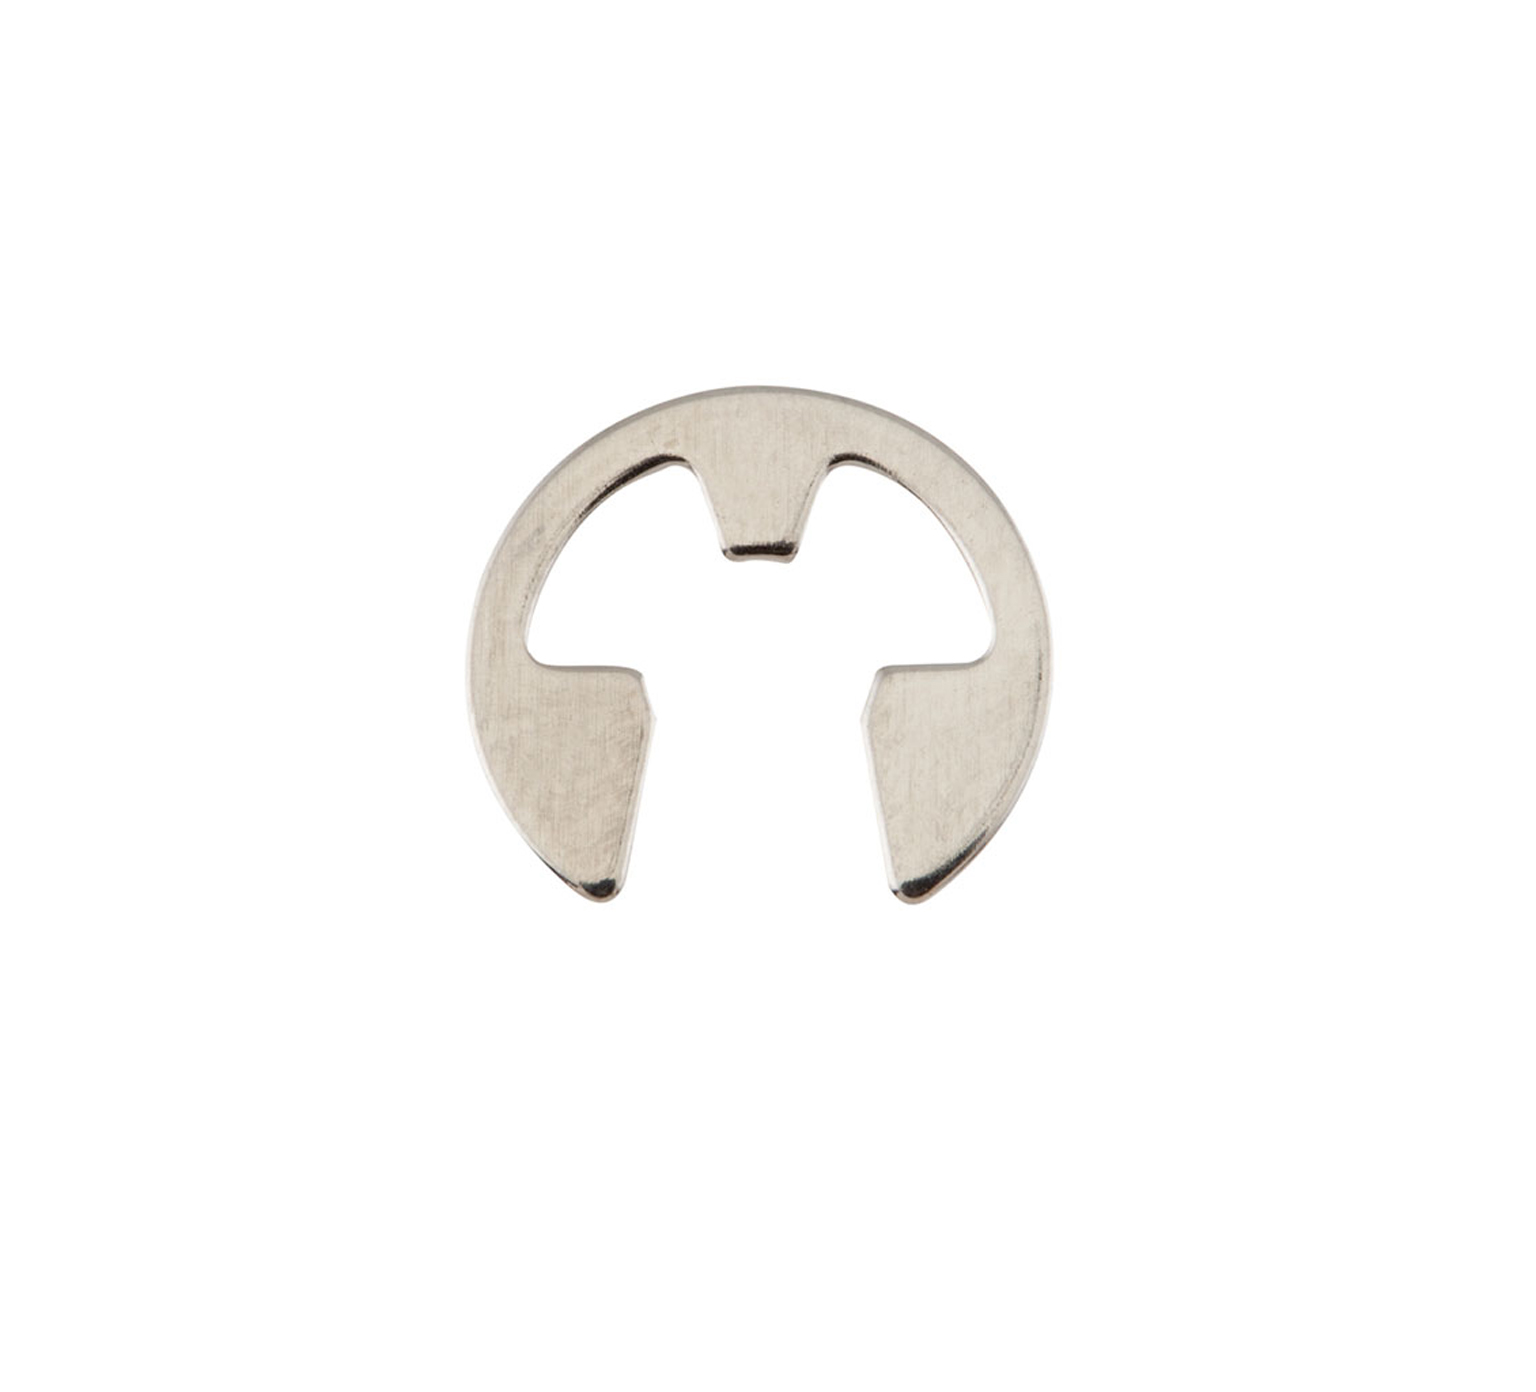 1035647 Stainless Steel Ring - 0.527 x 0.025 in alt 1